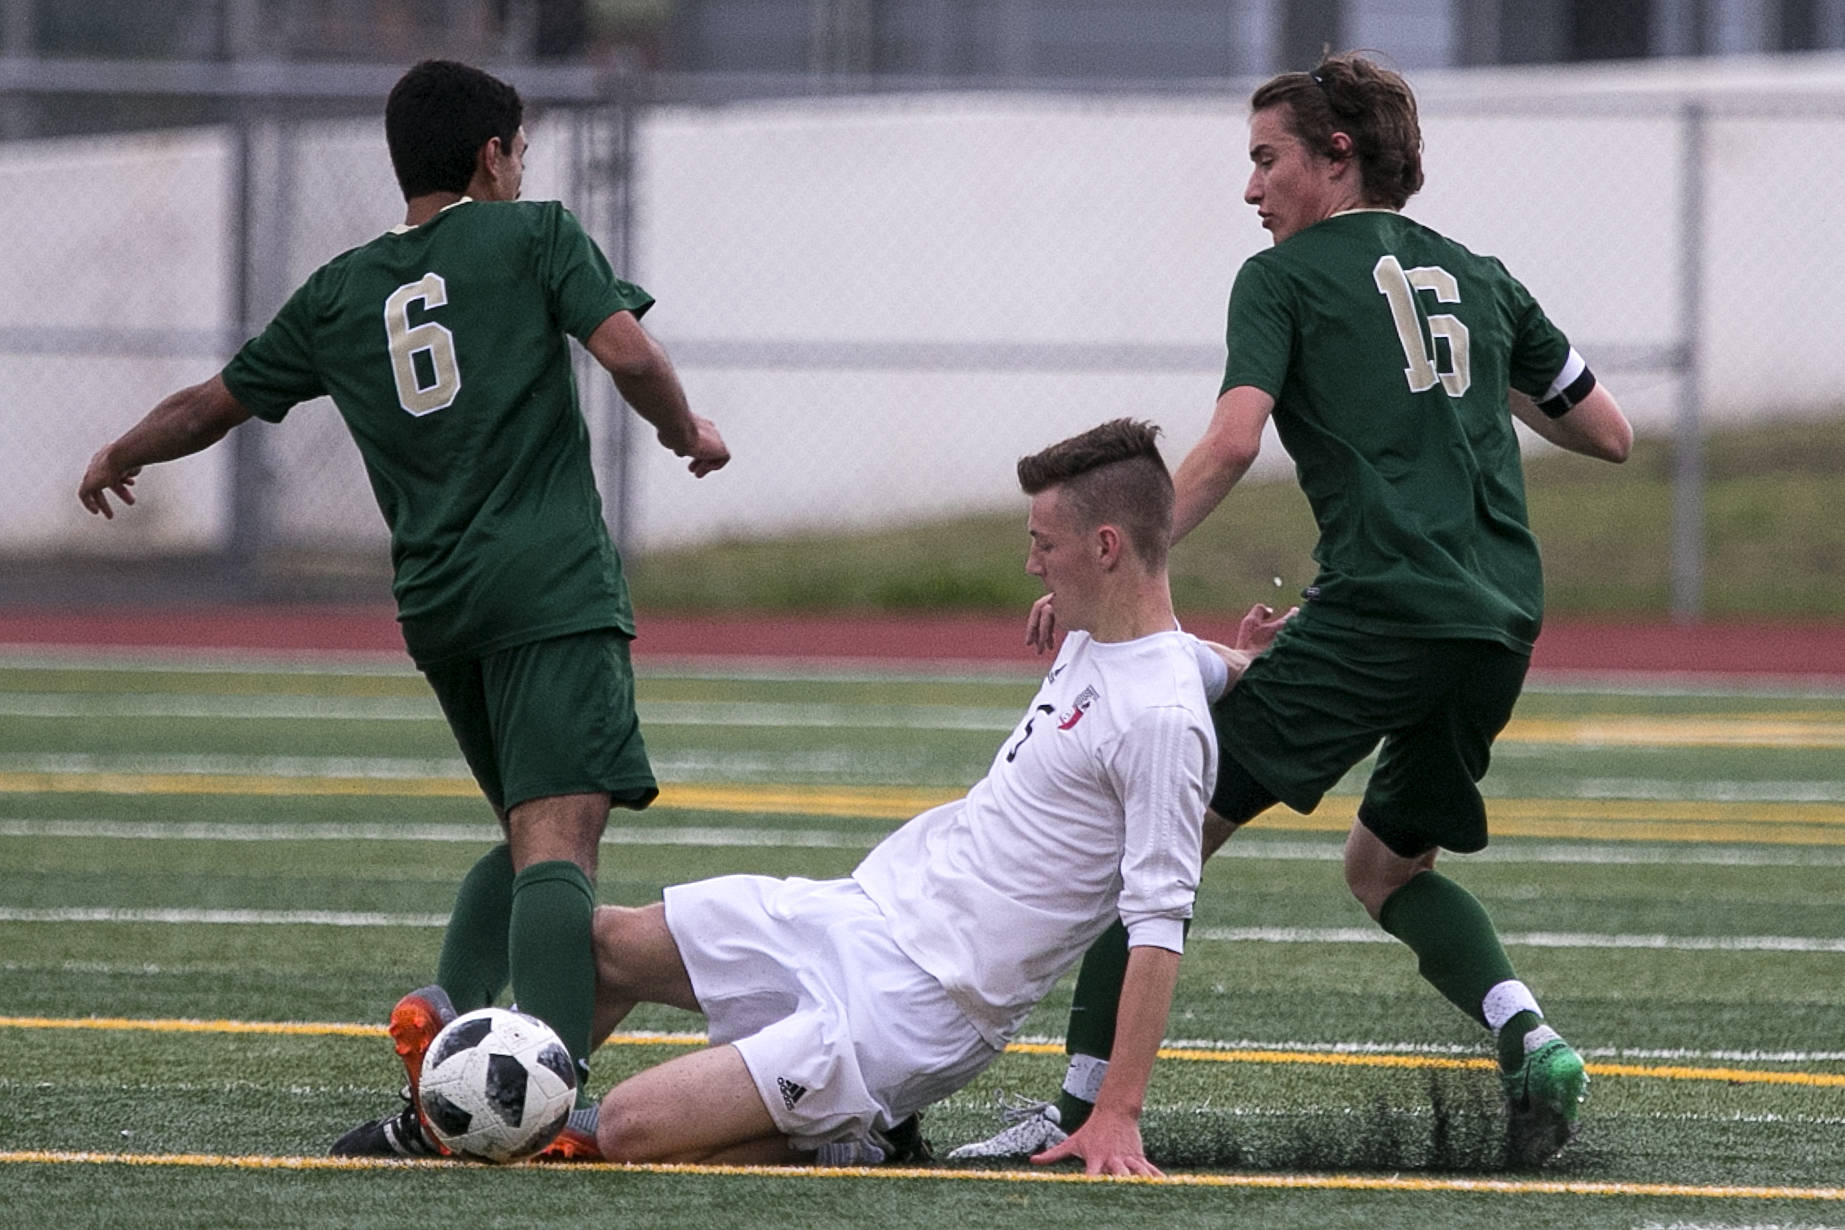 Snohomish’s Liam Raney slides to dislodge the ball from Redmond’s Victor Araujo (left) with Jacen Stein trailing in the quarterfinals Friday night at Veterans Memorial Stadiums in Snohomish on May 18. (Kevin Clark / The Herald)